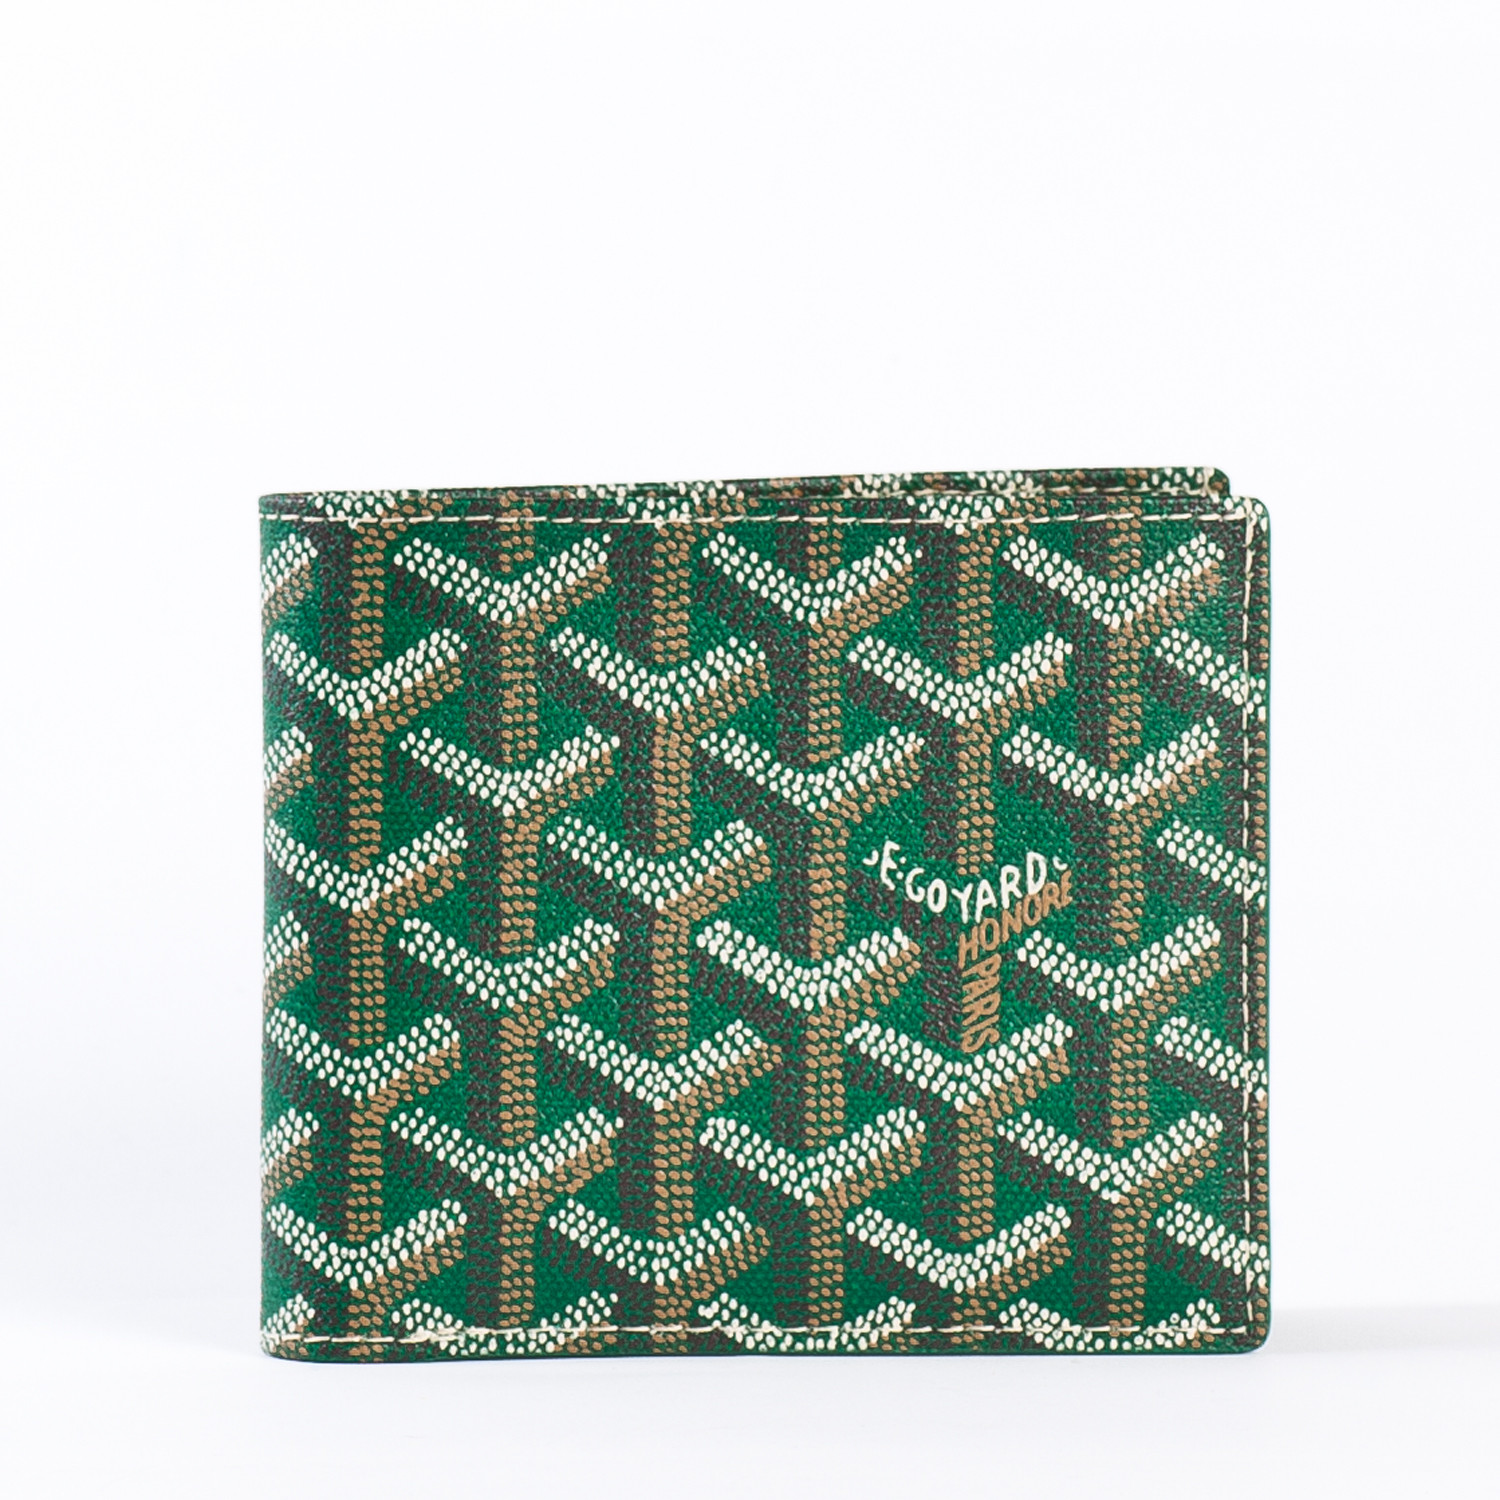 APM 110 ST Florentin // Colored (Green) - Goyard - Touch of Modern